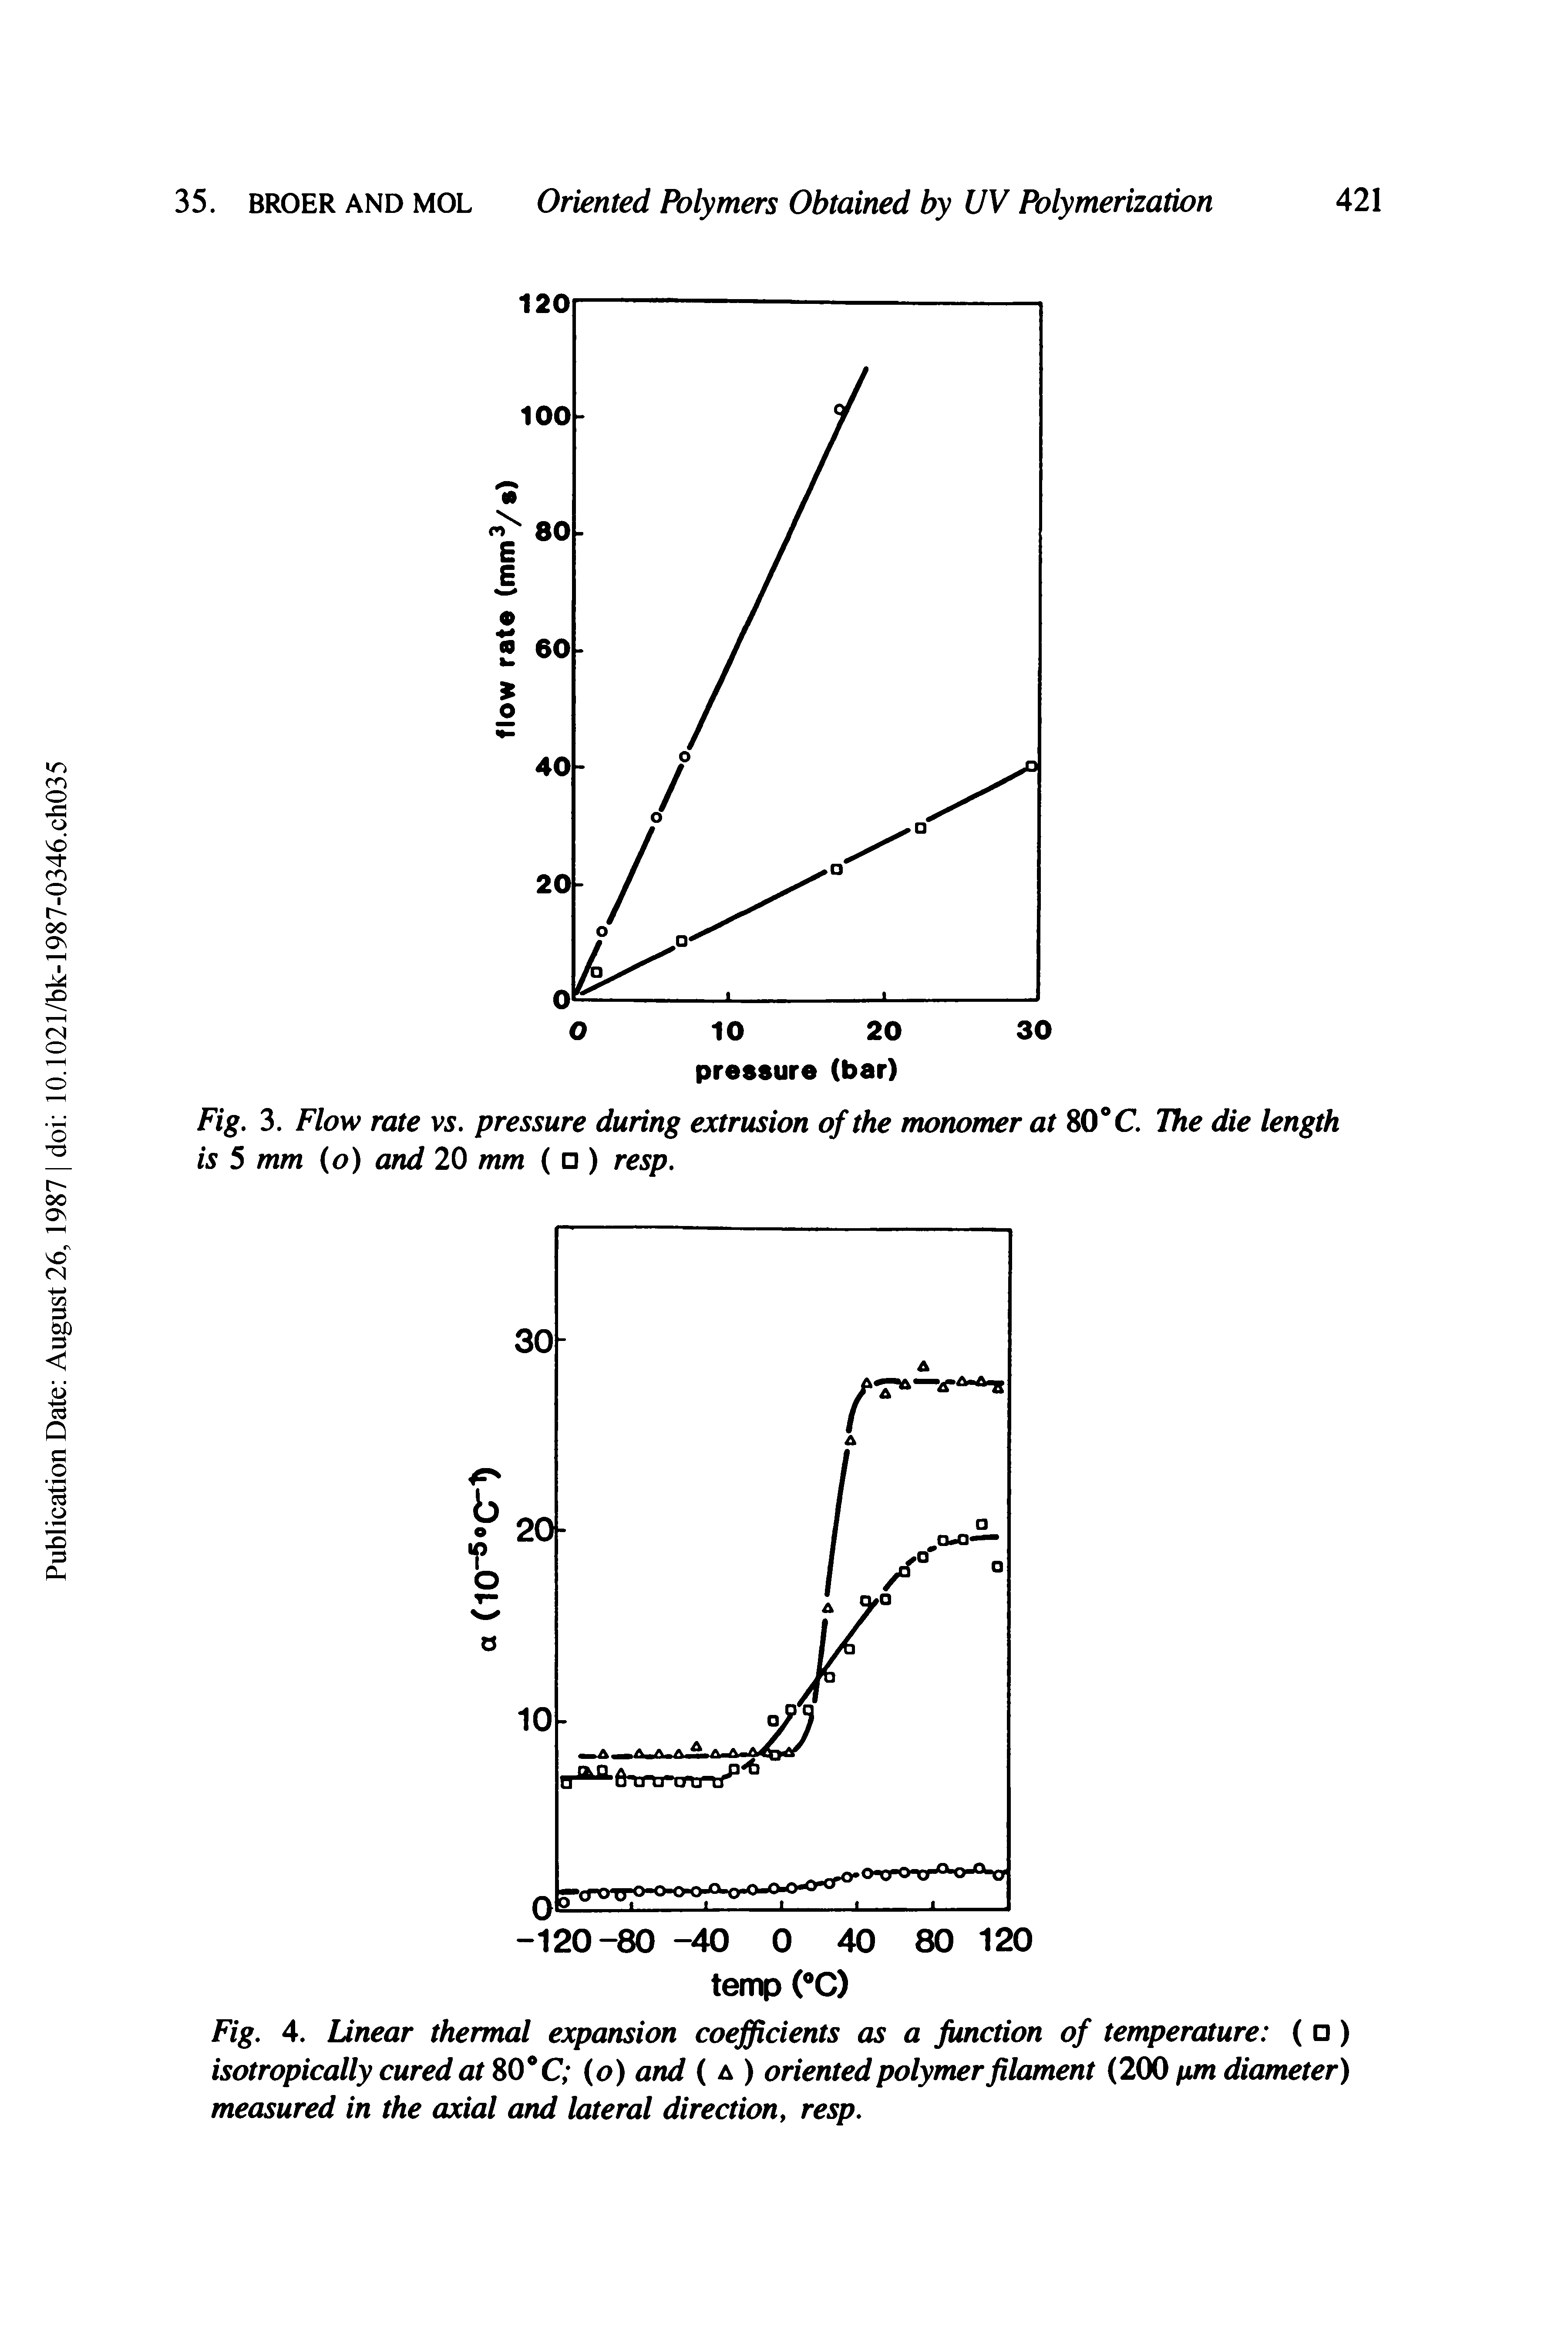 Fig. 3. Flow rate vs. pressure during extrusion of the monomer at 80 C The die length is 5 mm o) and 20 mm ( ) resp.